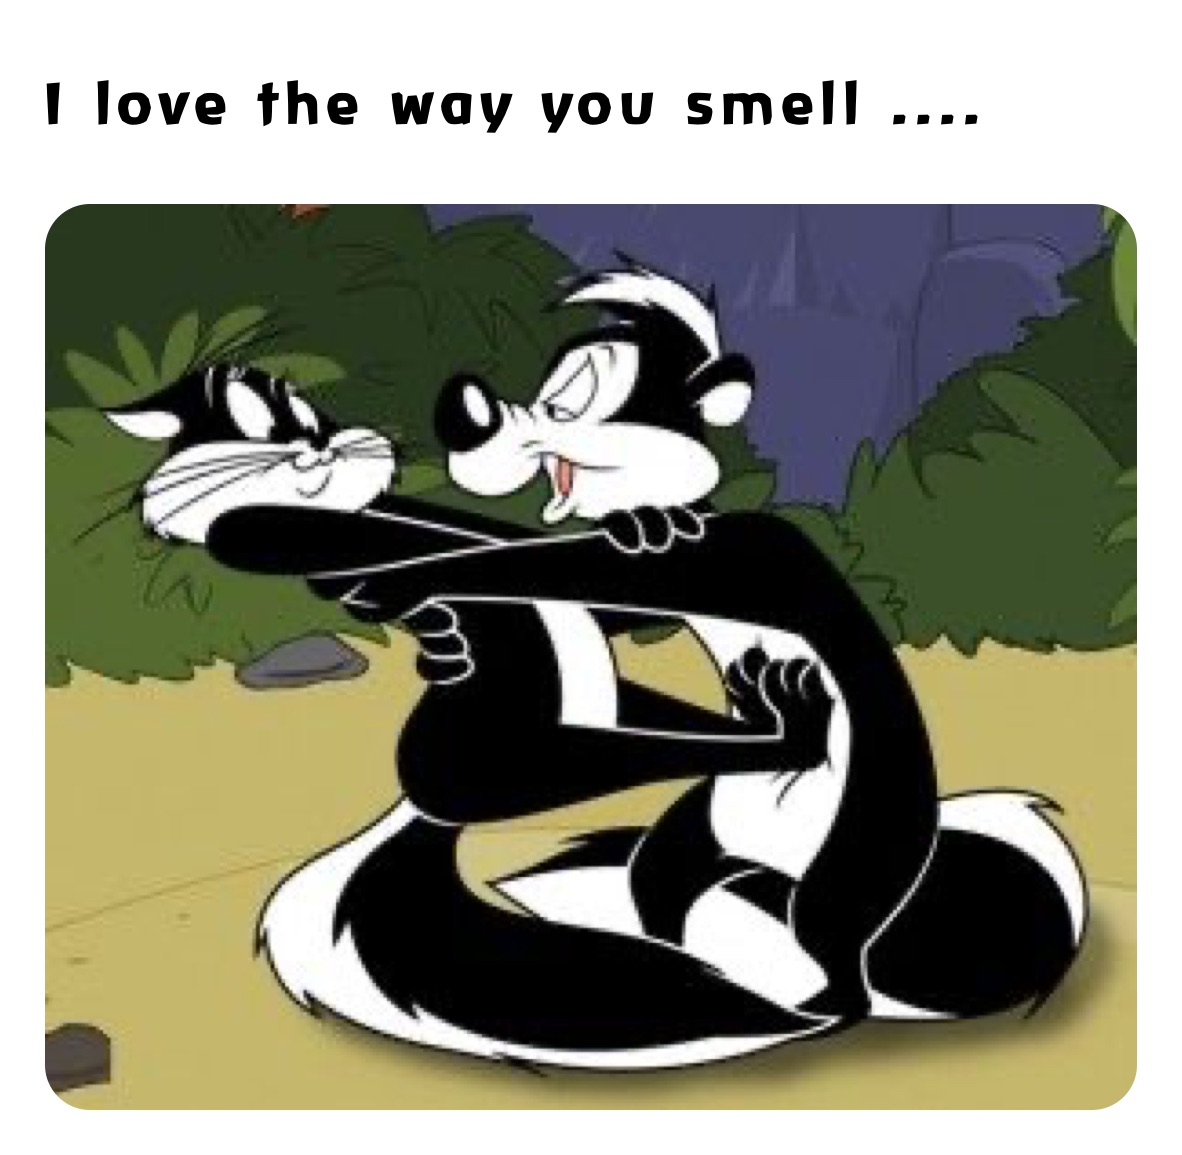 I love the way you smell .... 